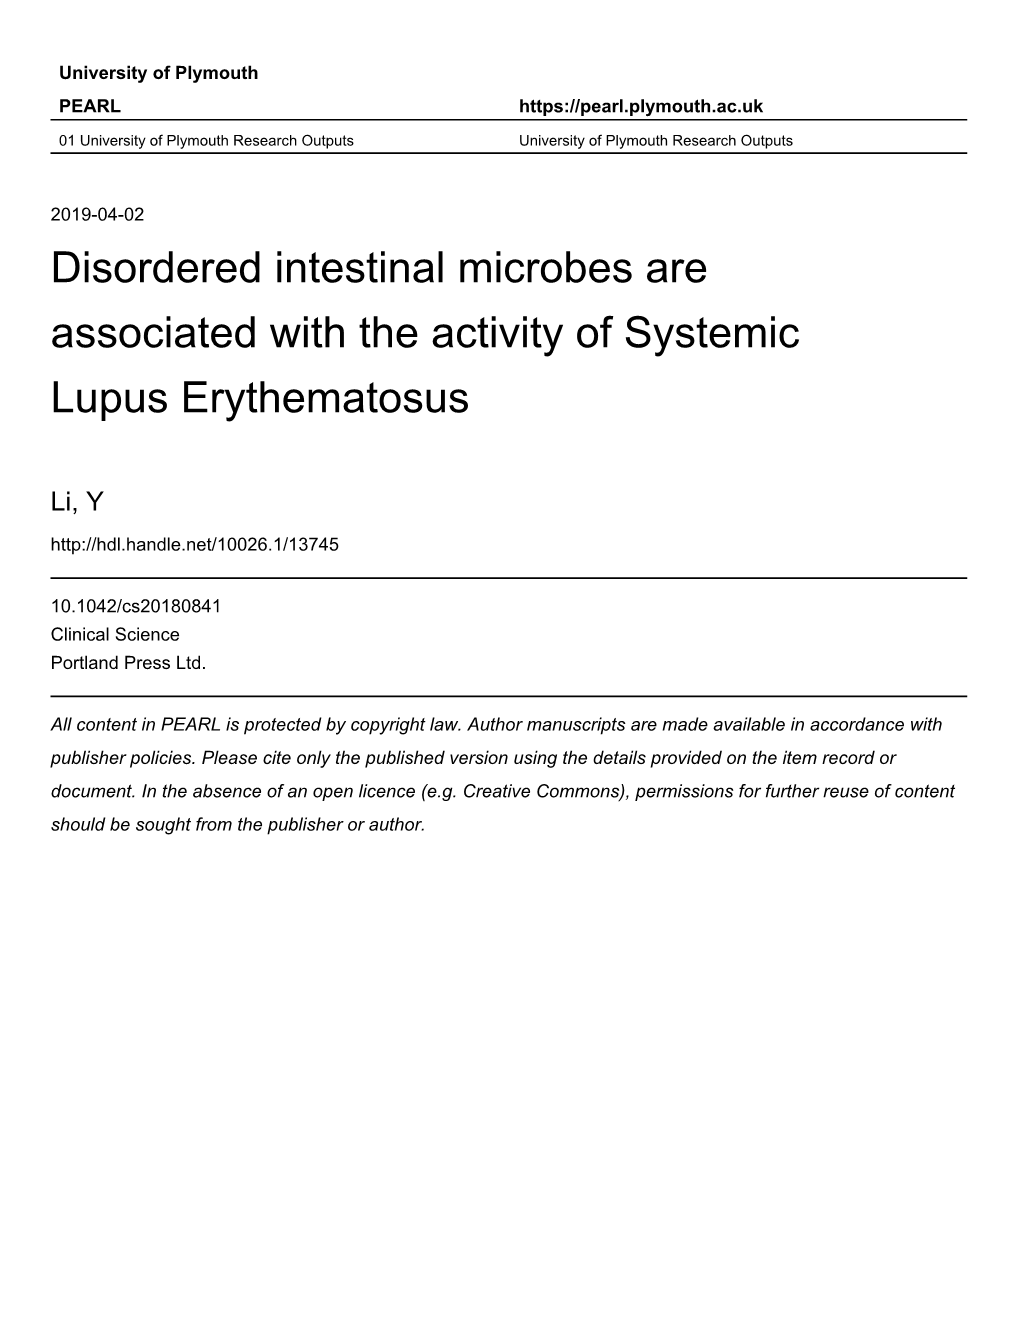 Disordered Intestinal Microbes Are Associated with the Activity of Systemic Lupus Erythematosus